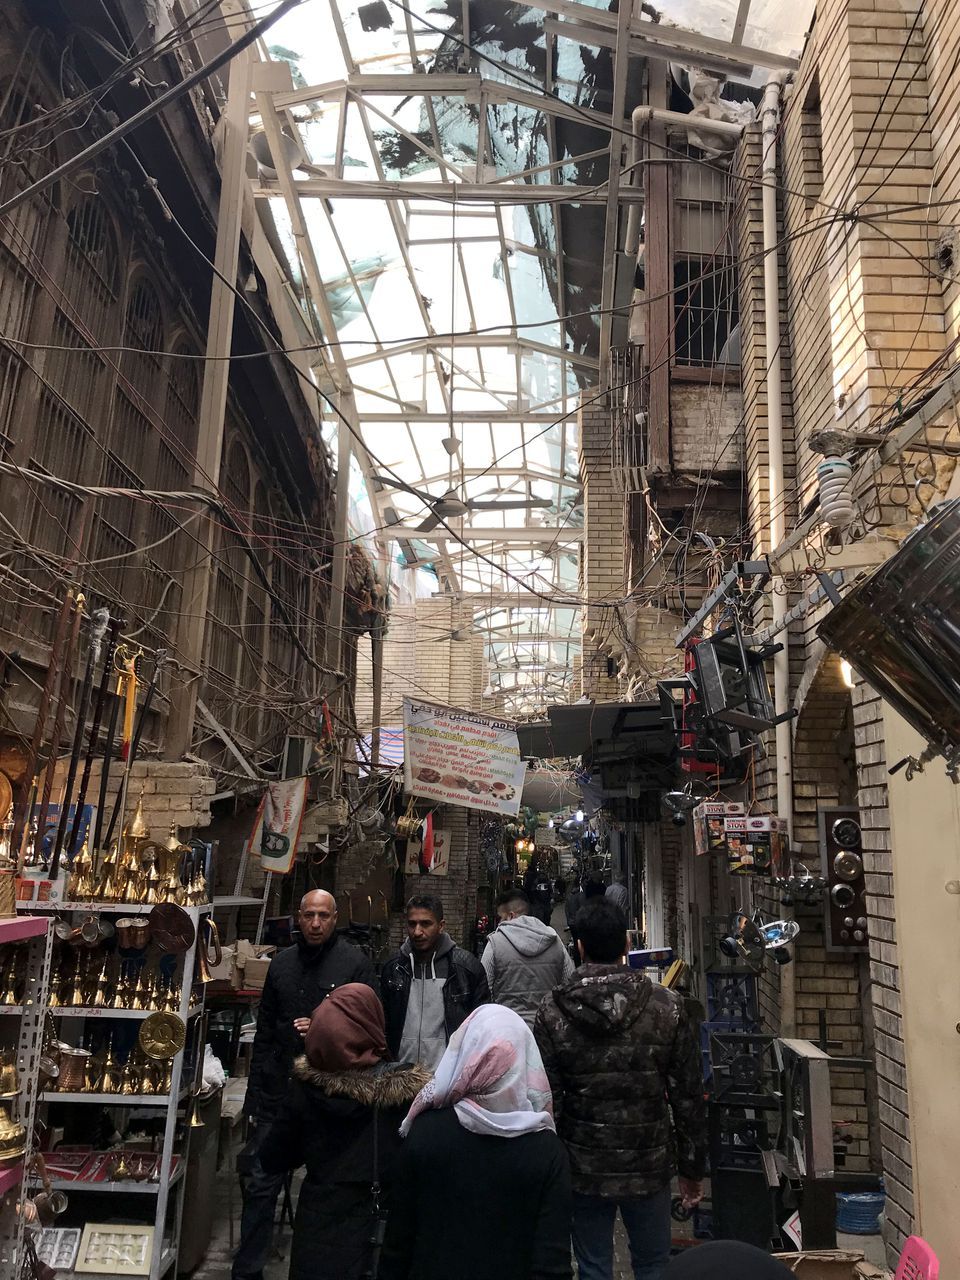 The sword was purchased at a blacksmith's shop in this alley on Al Rasheed Street, Baghdad's oldest streets. Image by Zahra Ahmad. Iraq, 2019.